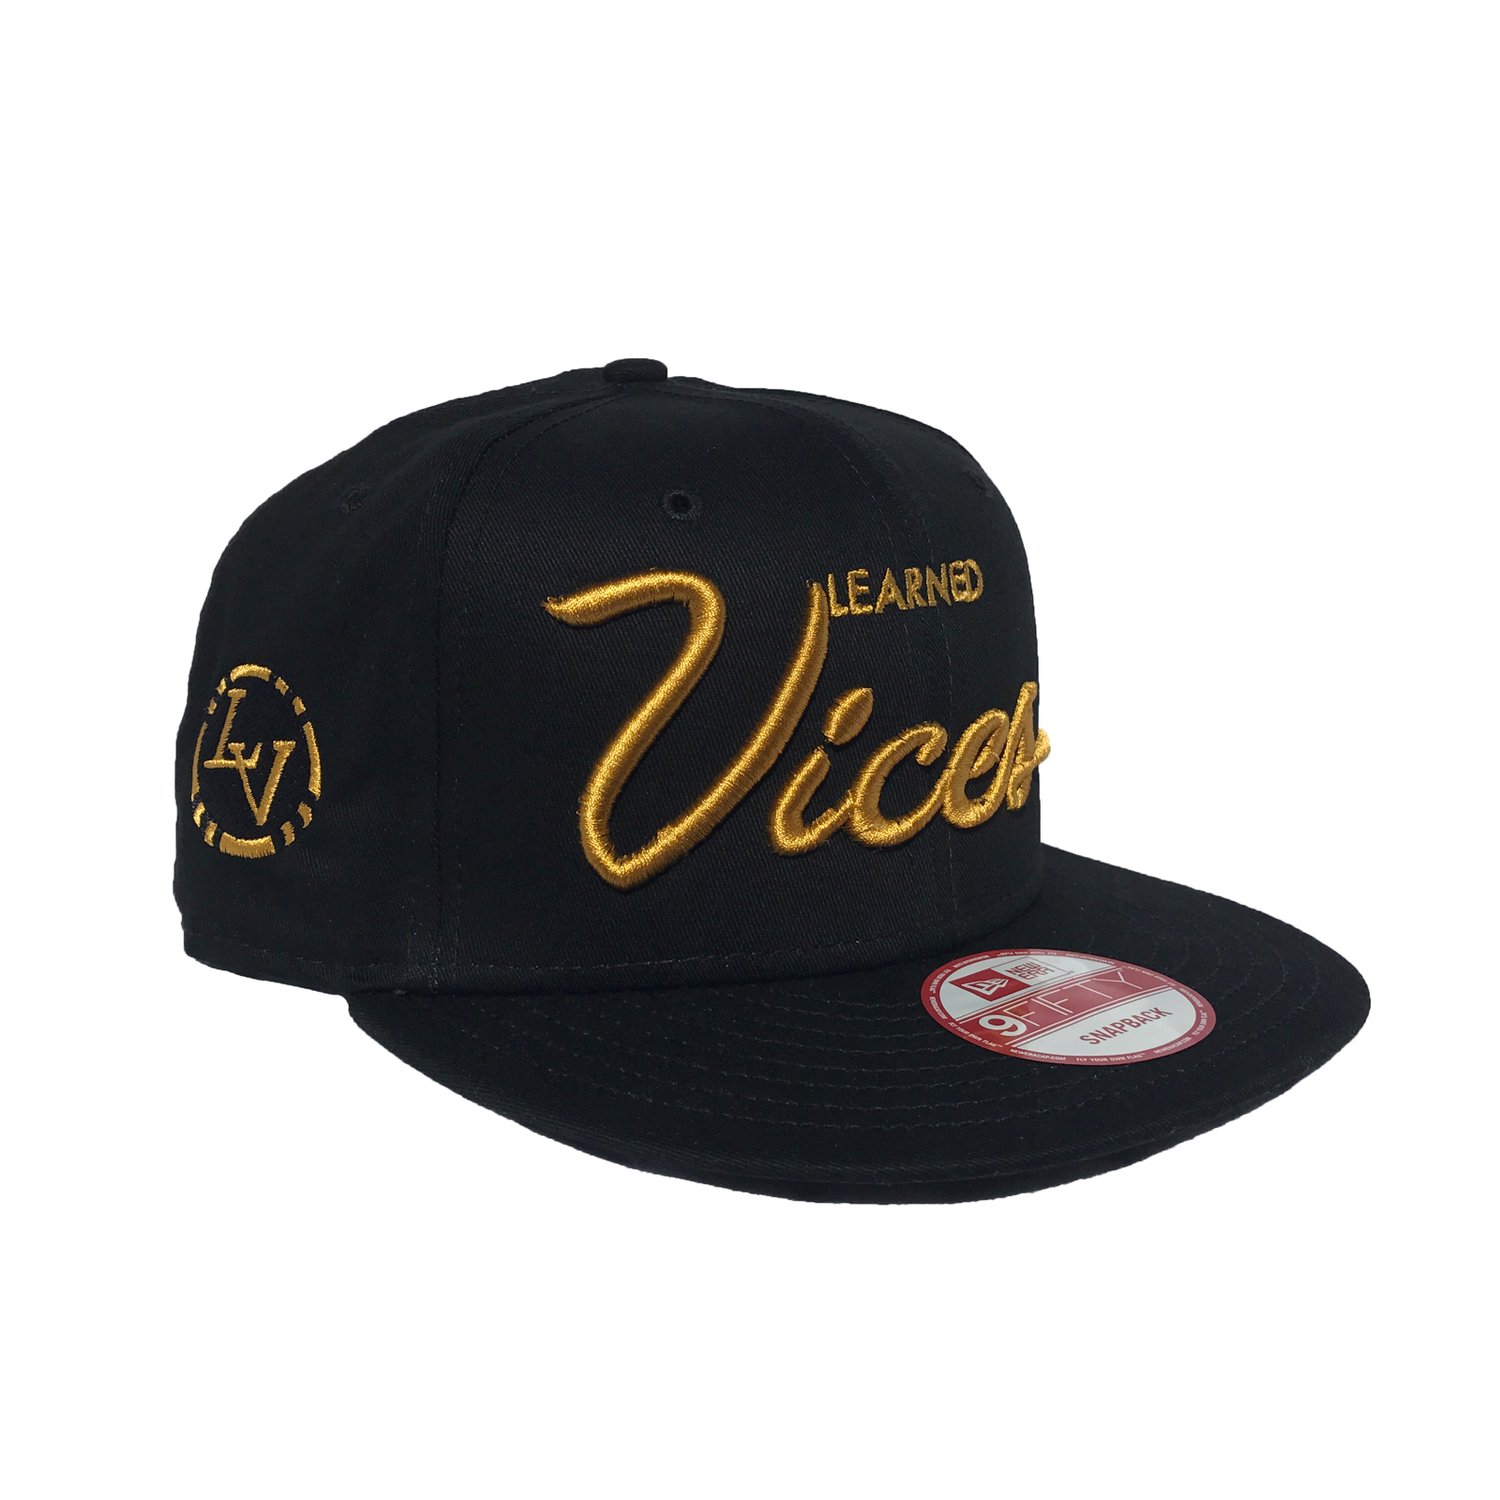 Image of 1st Rounders Snapback - BLK/GLD